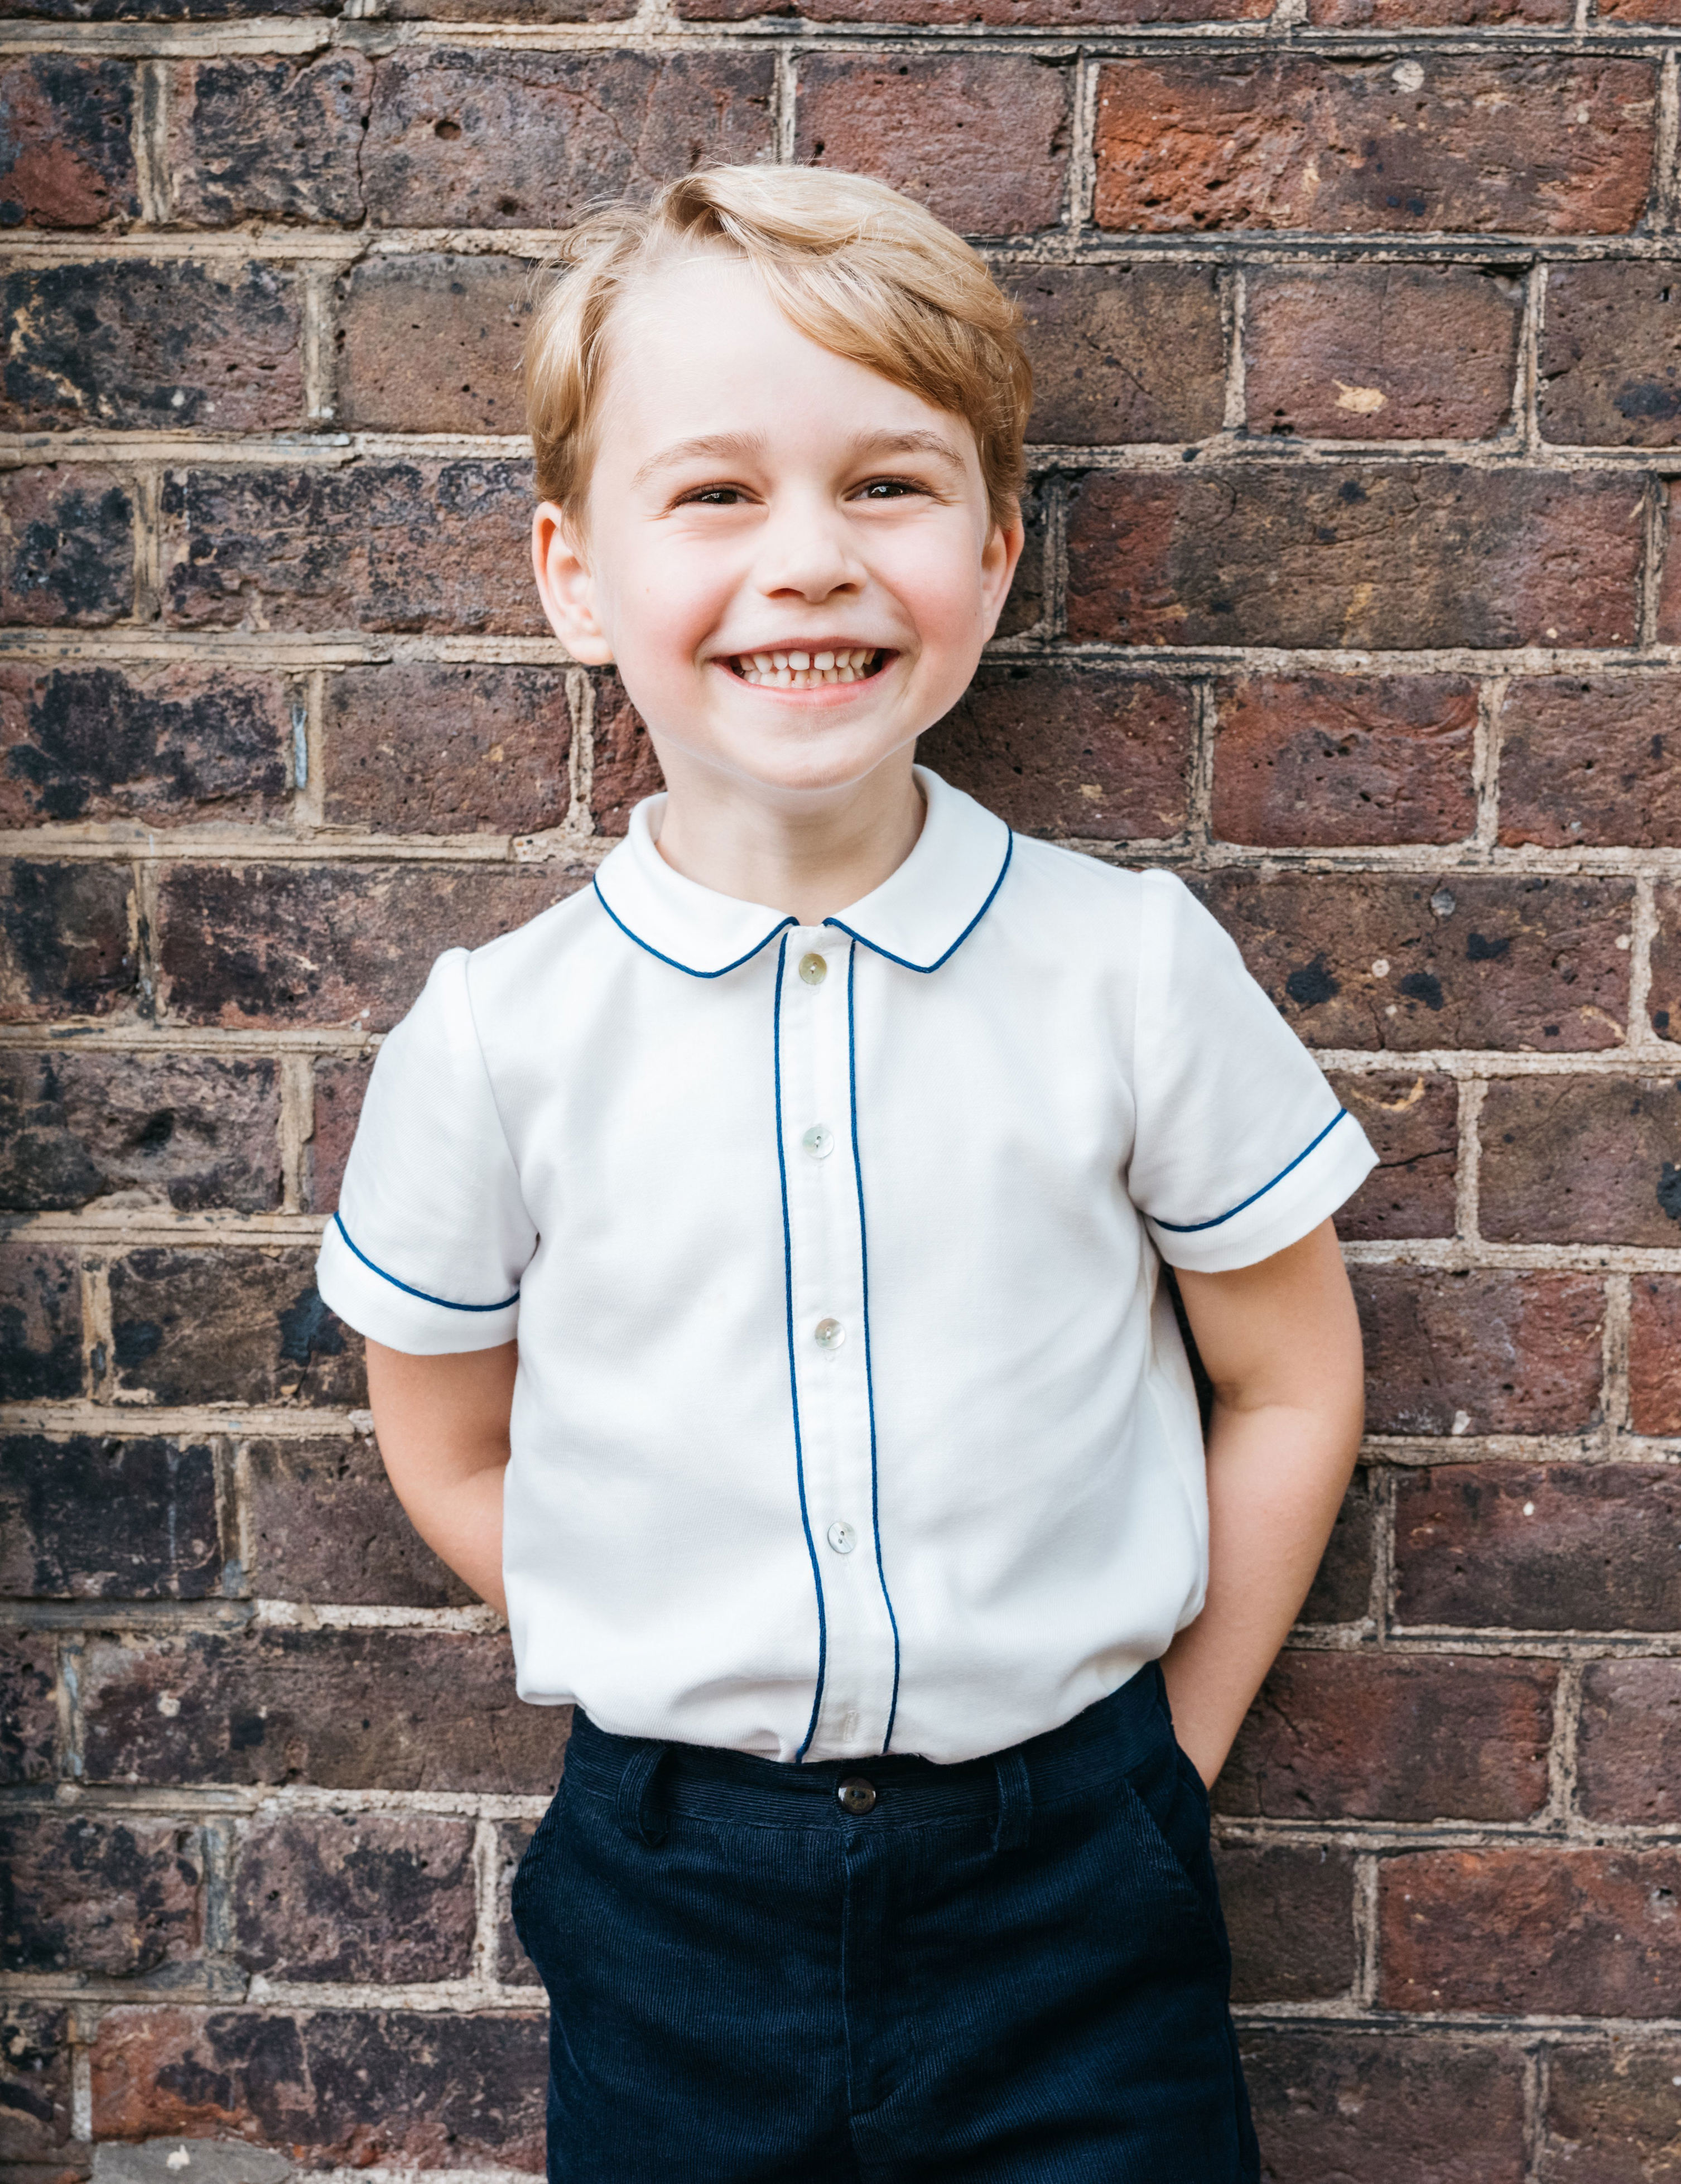 <p>To celebrate Prince George's 5th birthday on July 22, 2018, <a href="https://www.wonderwall.com/celebrity/profiles/overview/prince-william-482.article">Prince William</a> and <a href="https://www.wonderwall.com/celebrity/profiles/overview/duchess-kate-1356.article">Duchess Kate</a> released this adorable image of the heir to the British throne at Clarence House in London on July 9.</p>